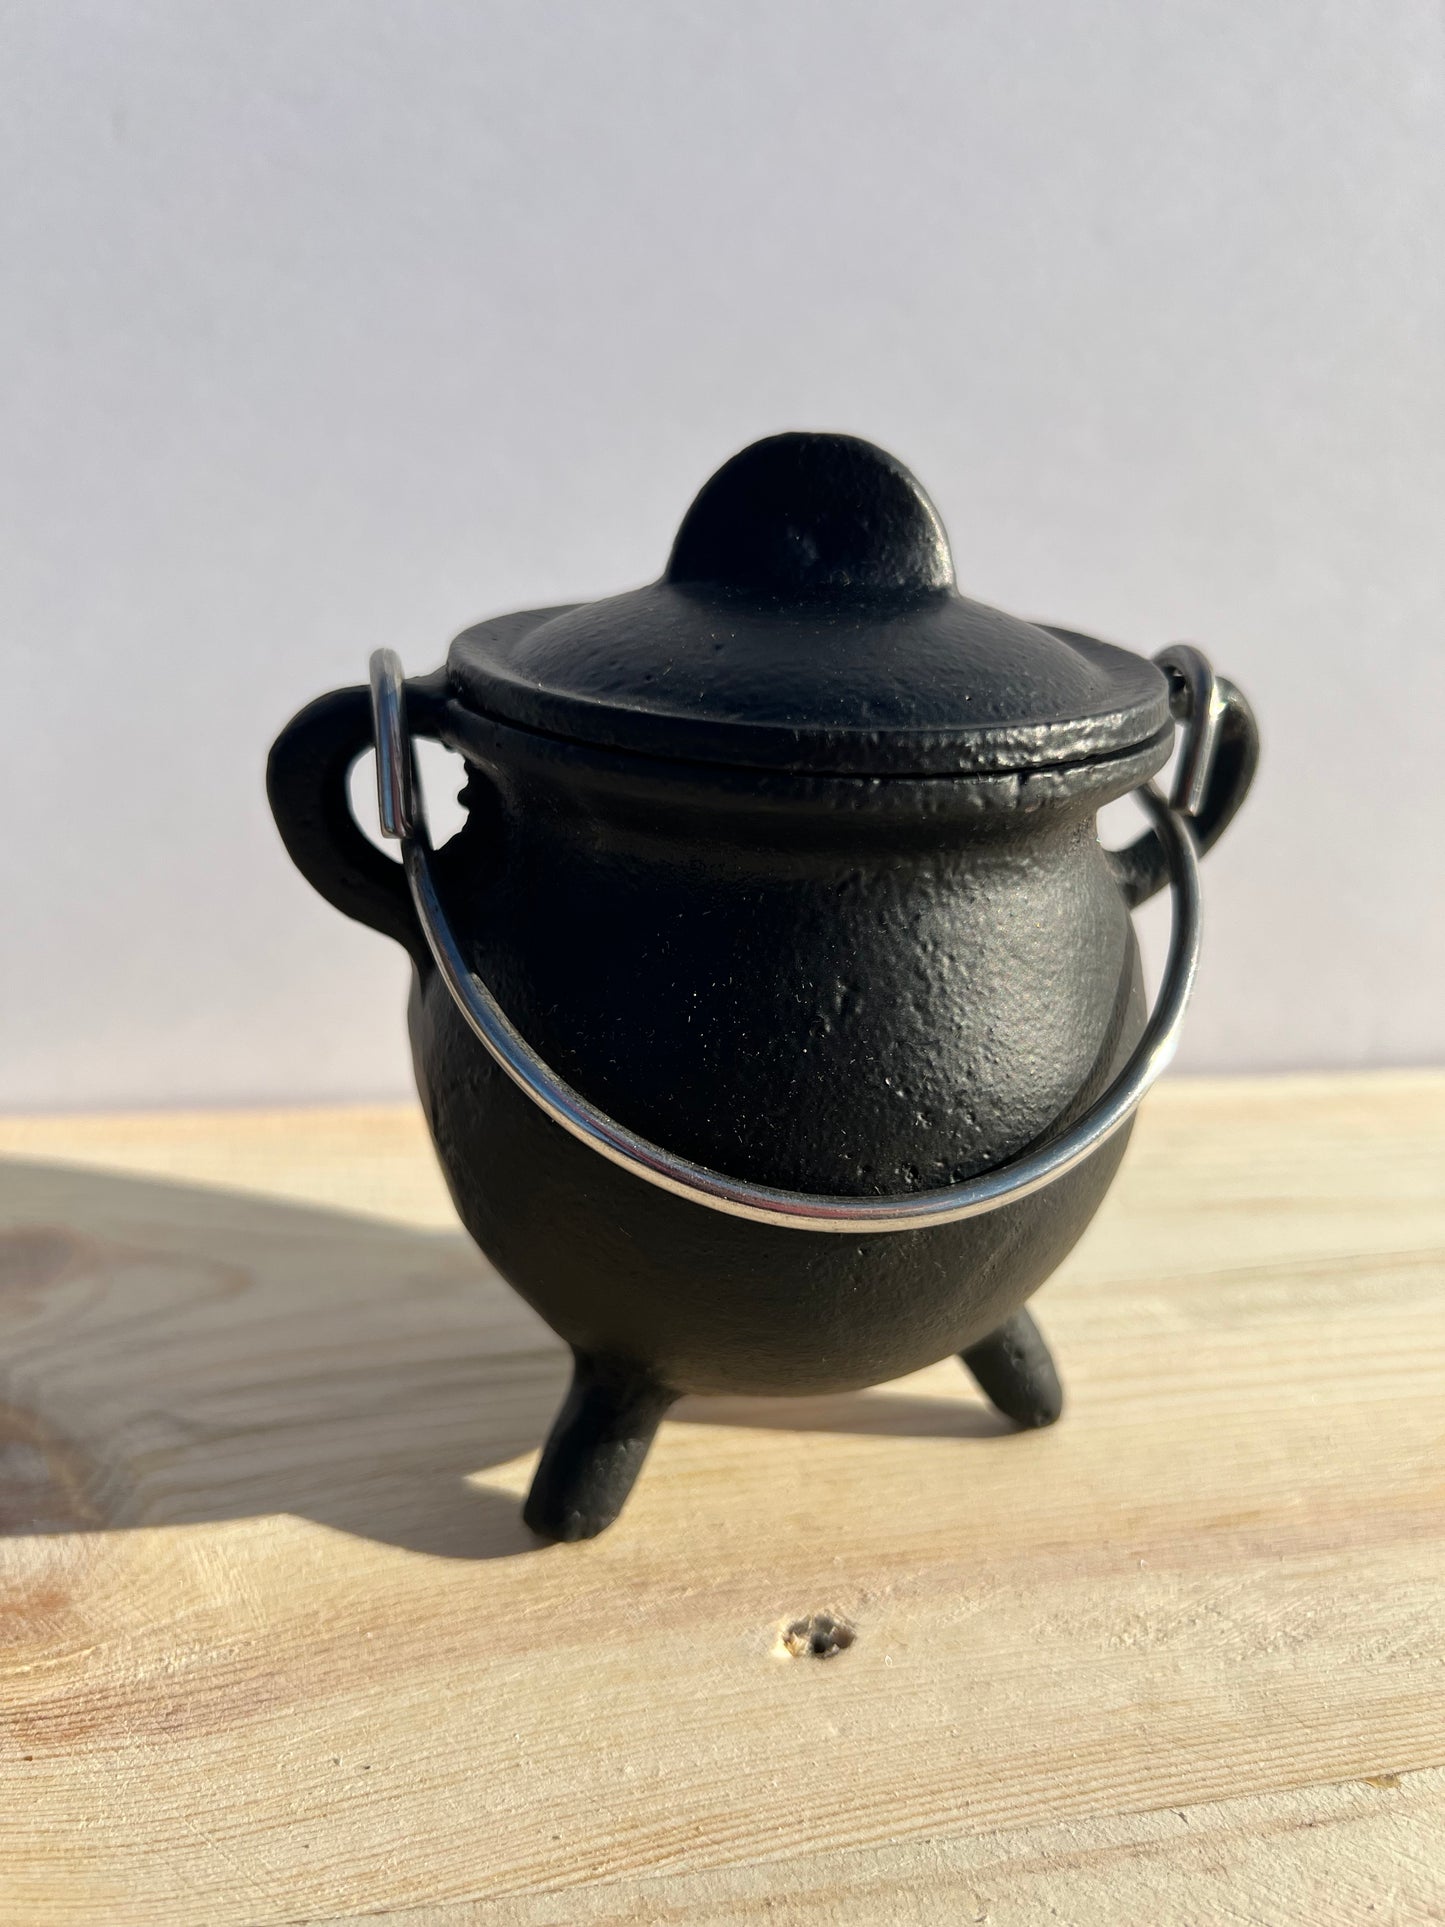 Potbelly cauldron with handle & lid.